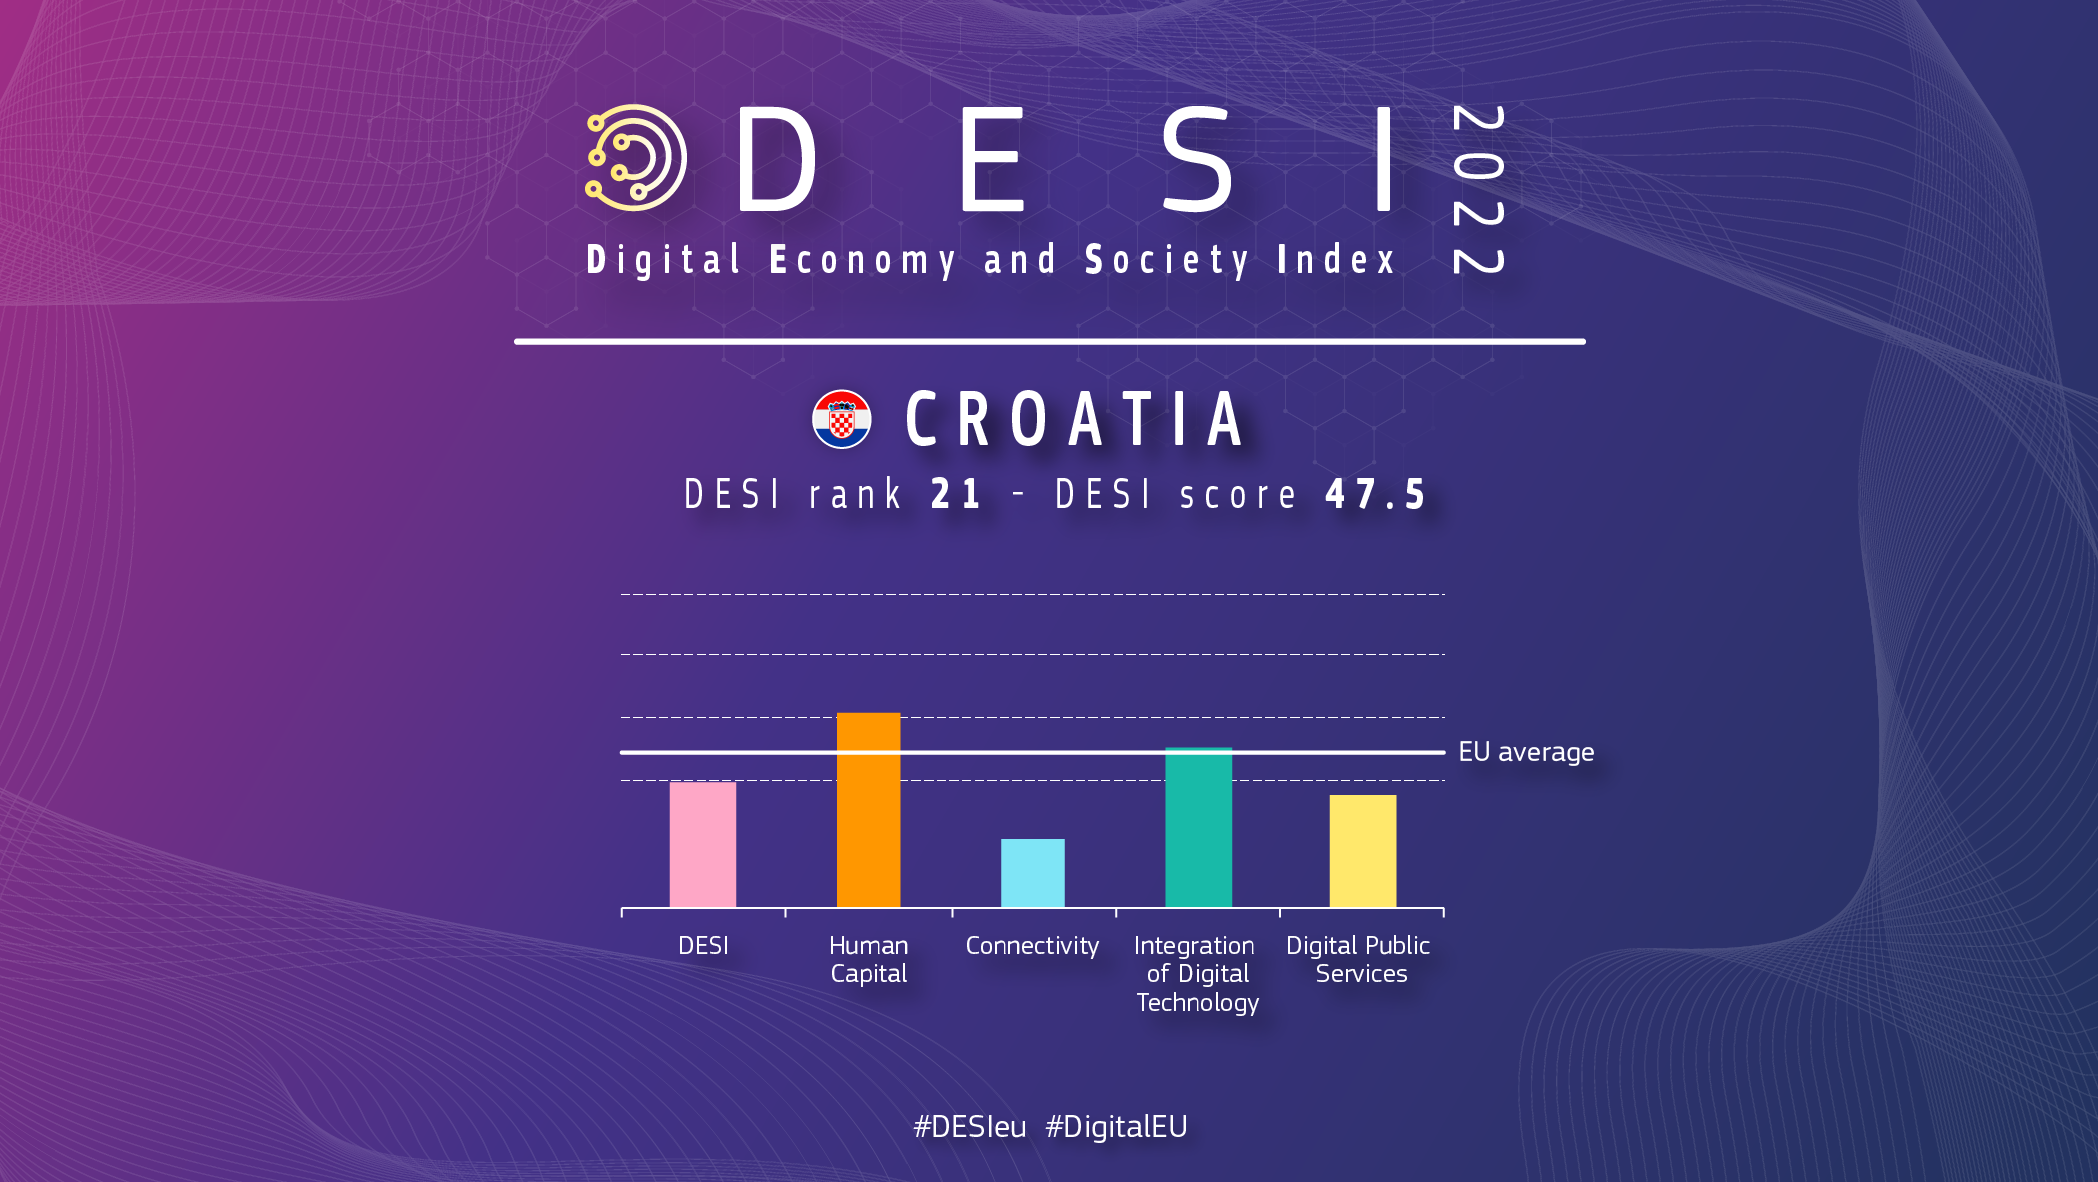 Graphic overview of Croatia in DESI showing a ranking of 21 and a score of 47.5